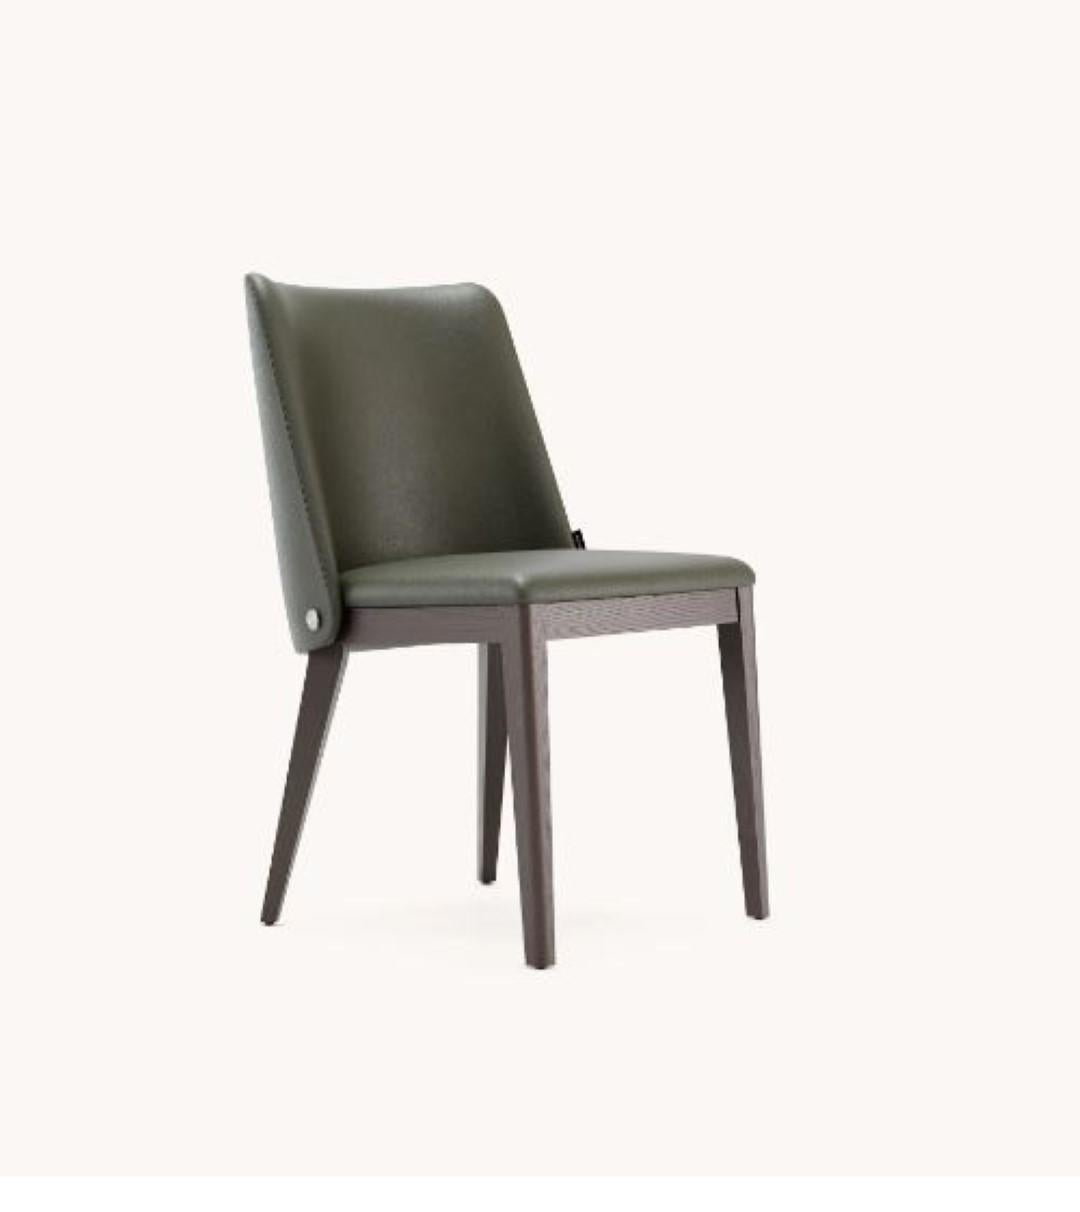 Louise chair by Domkapa
Materials: natural leather, Fumé stained ash.
Dimensions: W 52 x D 57 x H 82 cm. 
Also available in different materials. 

Louise chair's robust design exhales confidence and character allied with simple lines but a